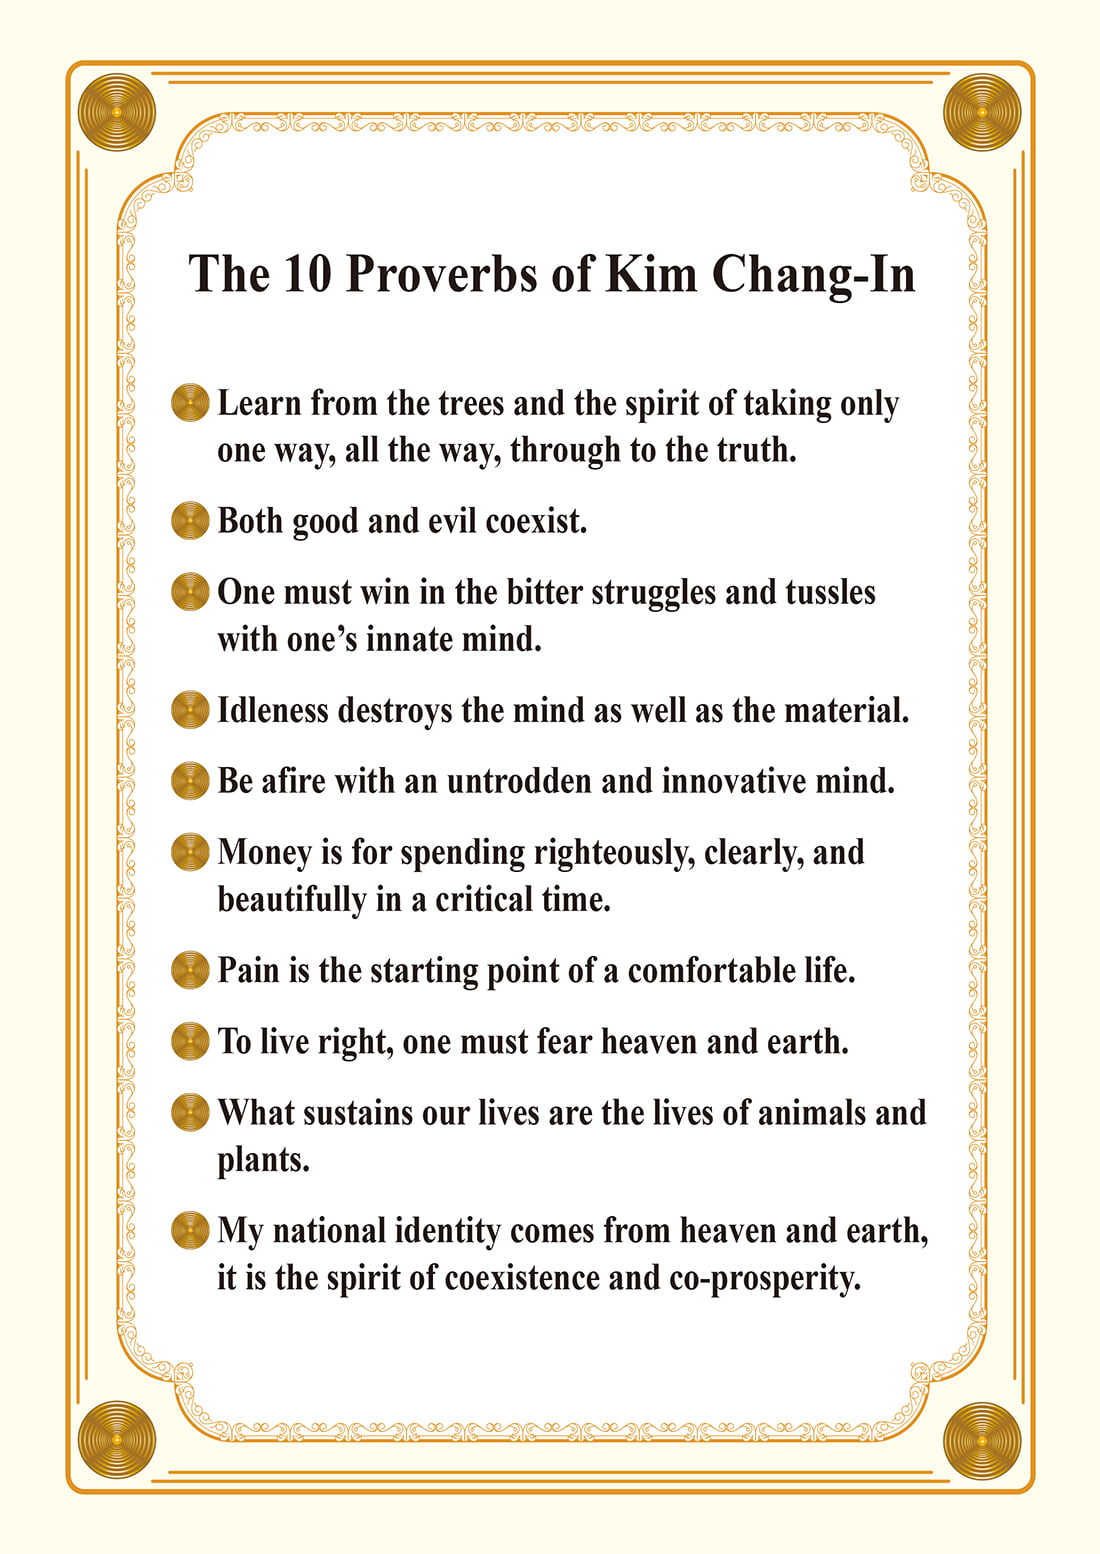 THE 10 PROVERBS OF CHAIRMAN KIM CHANG-IN